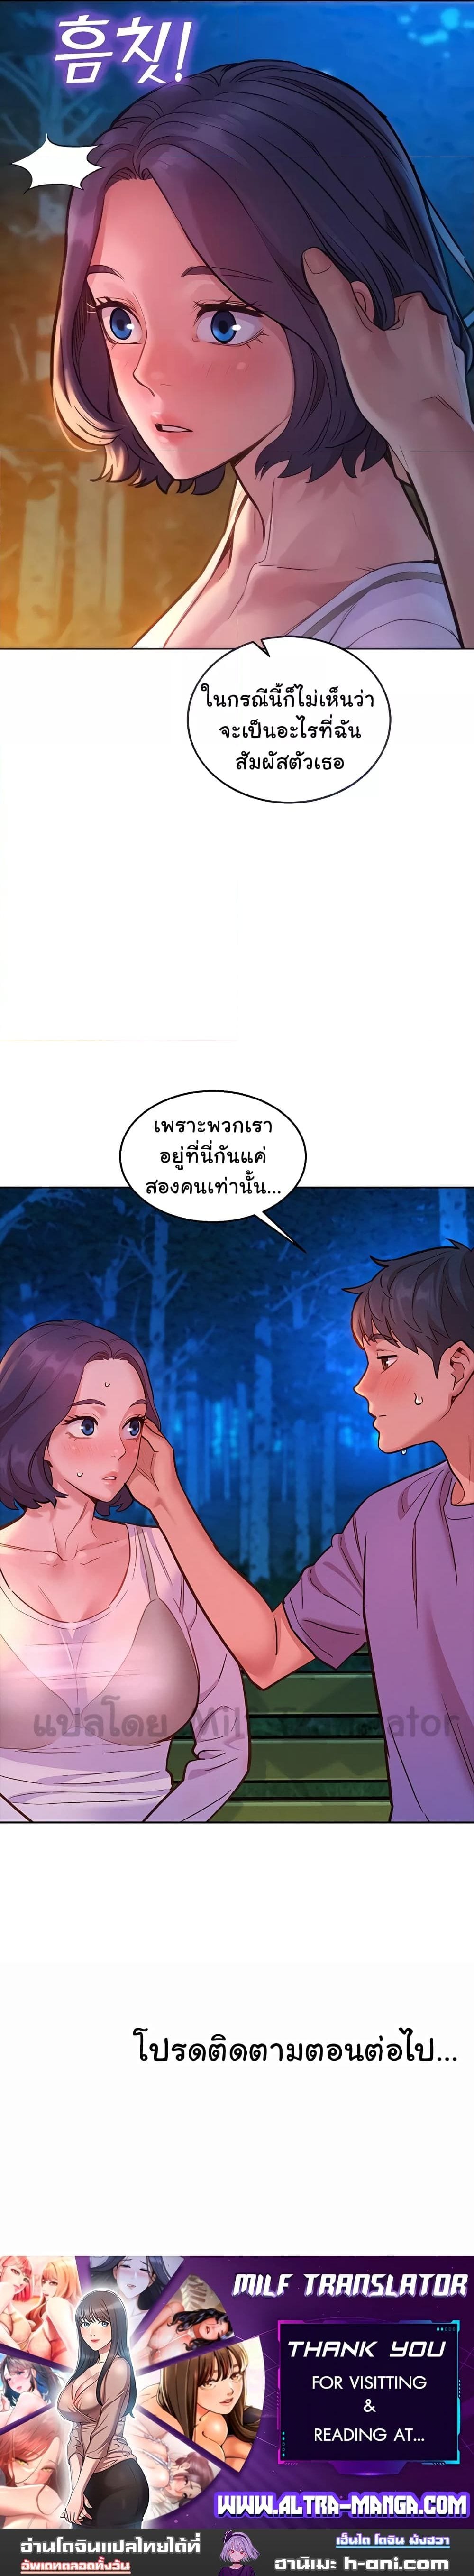 Let’s Hang Out from Today ตอนที่ 38 ภาพ 15